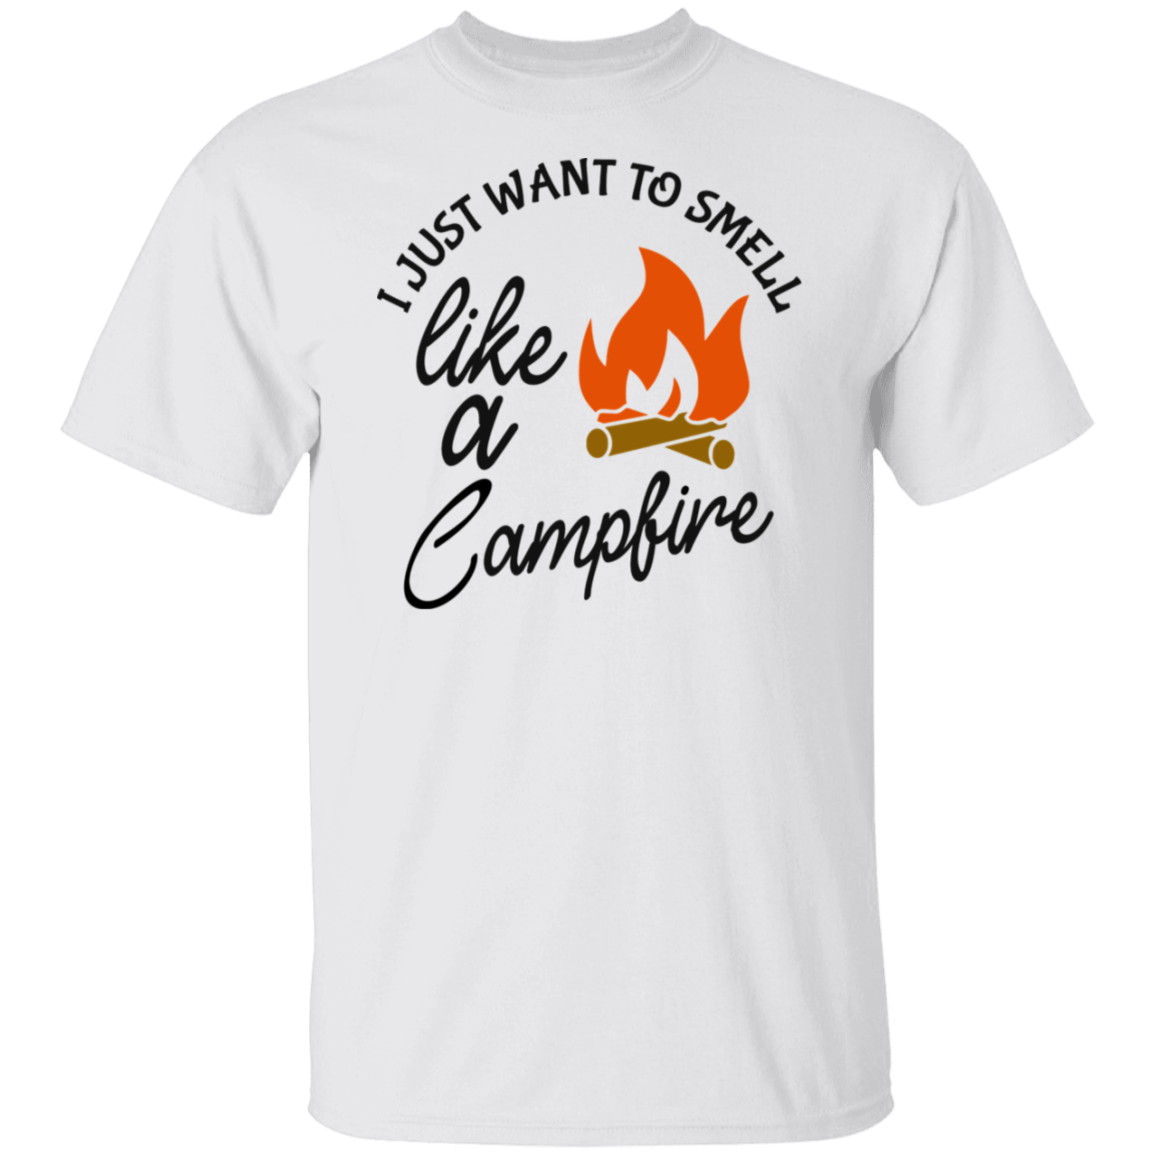 I Just Want To Smell Like A Campfire T-Shirt